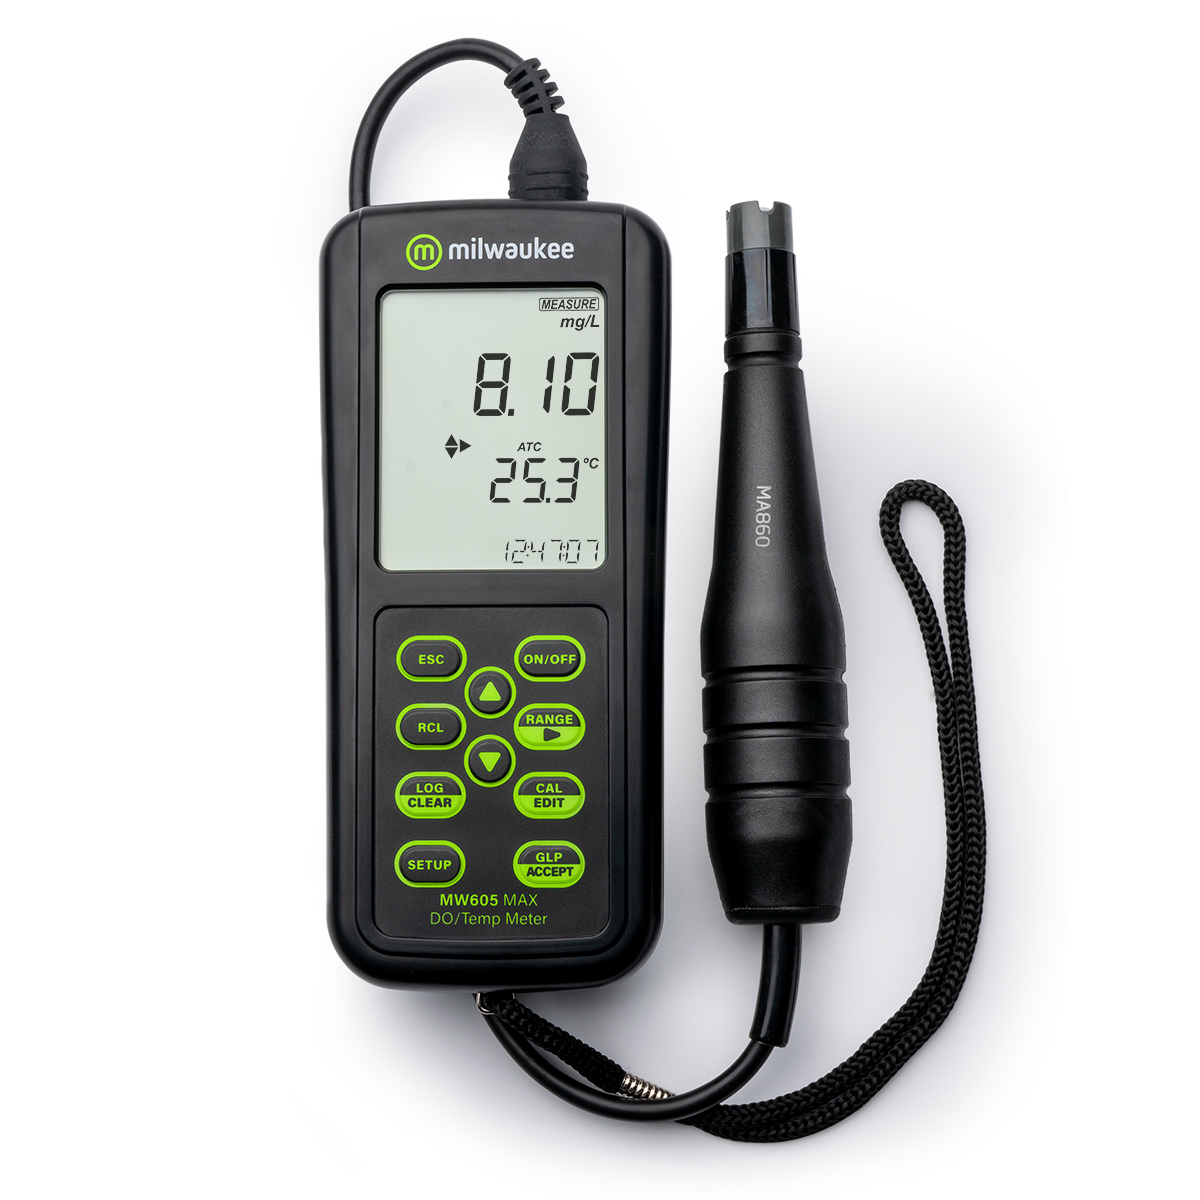 Waterproof IP67 Digital Thermometer with Thermistor Probe